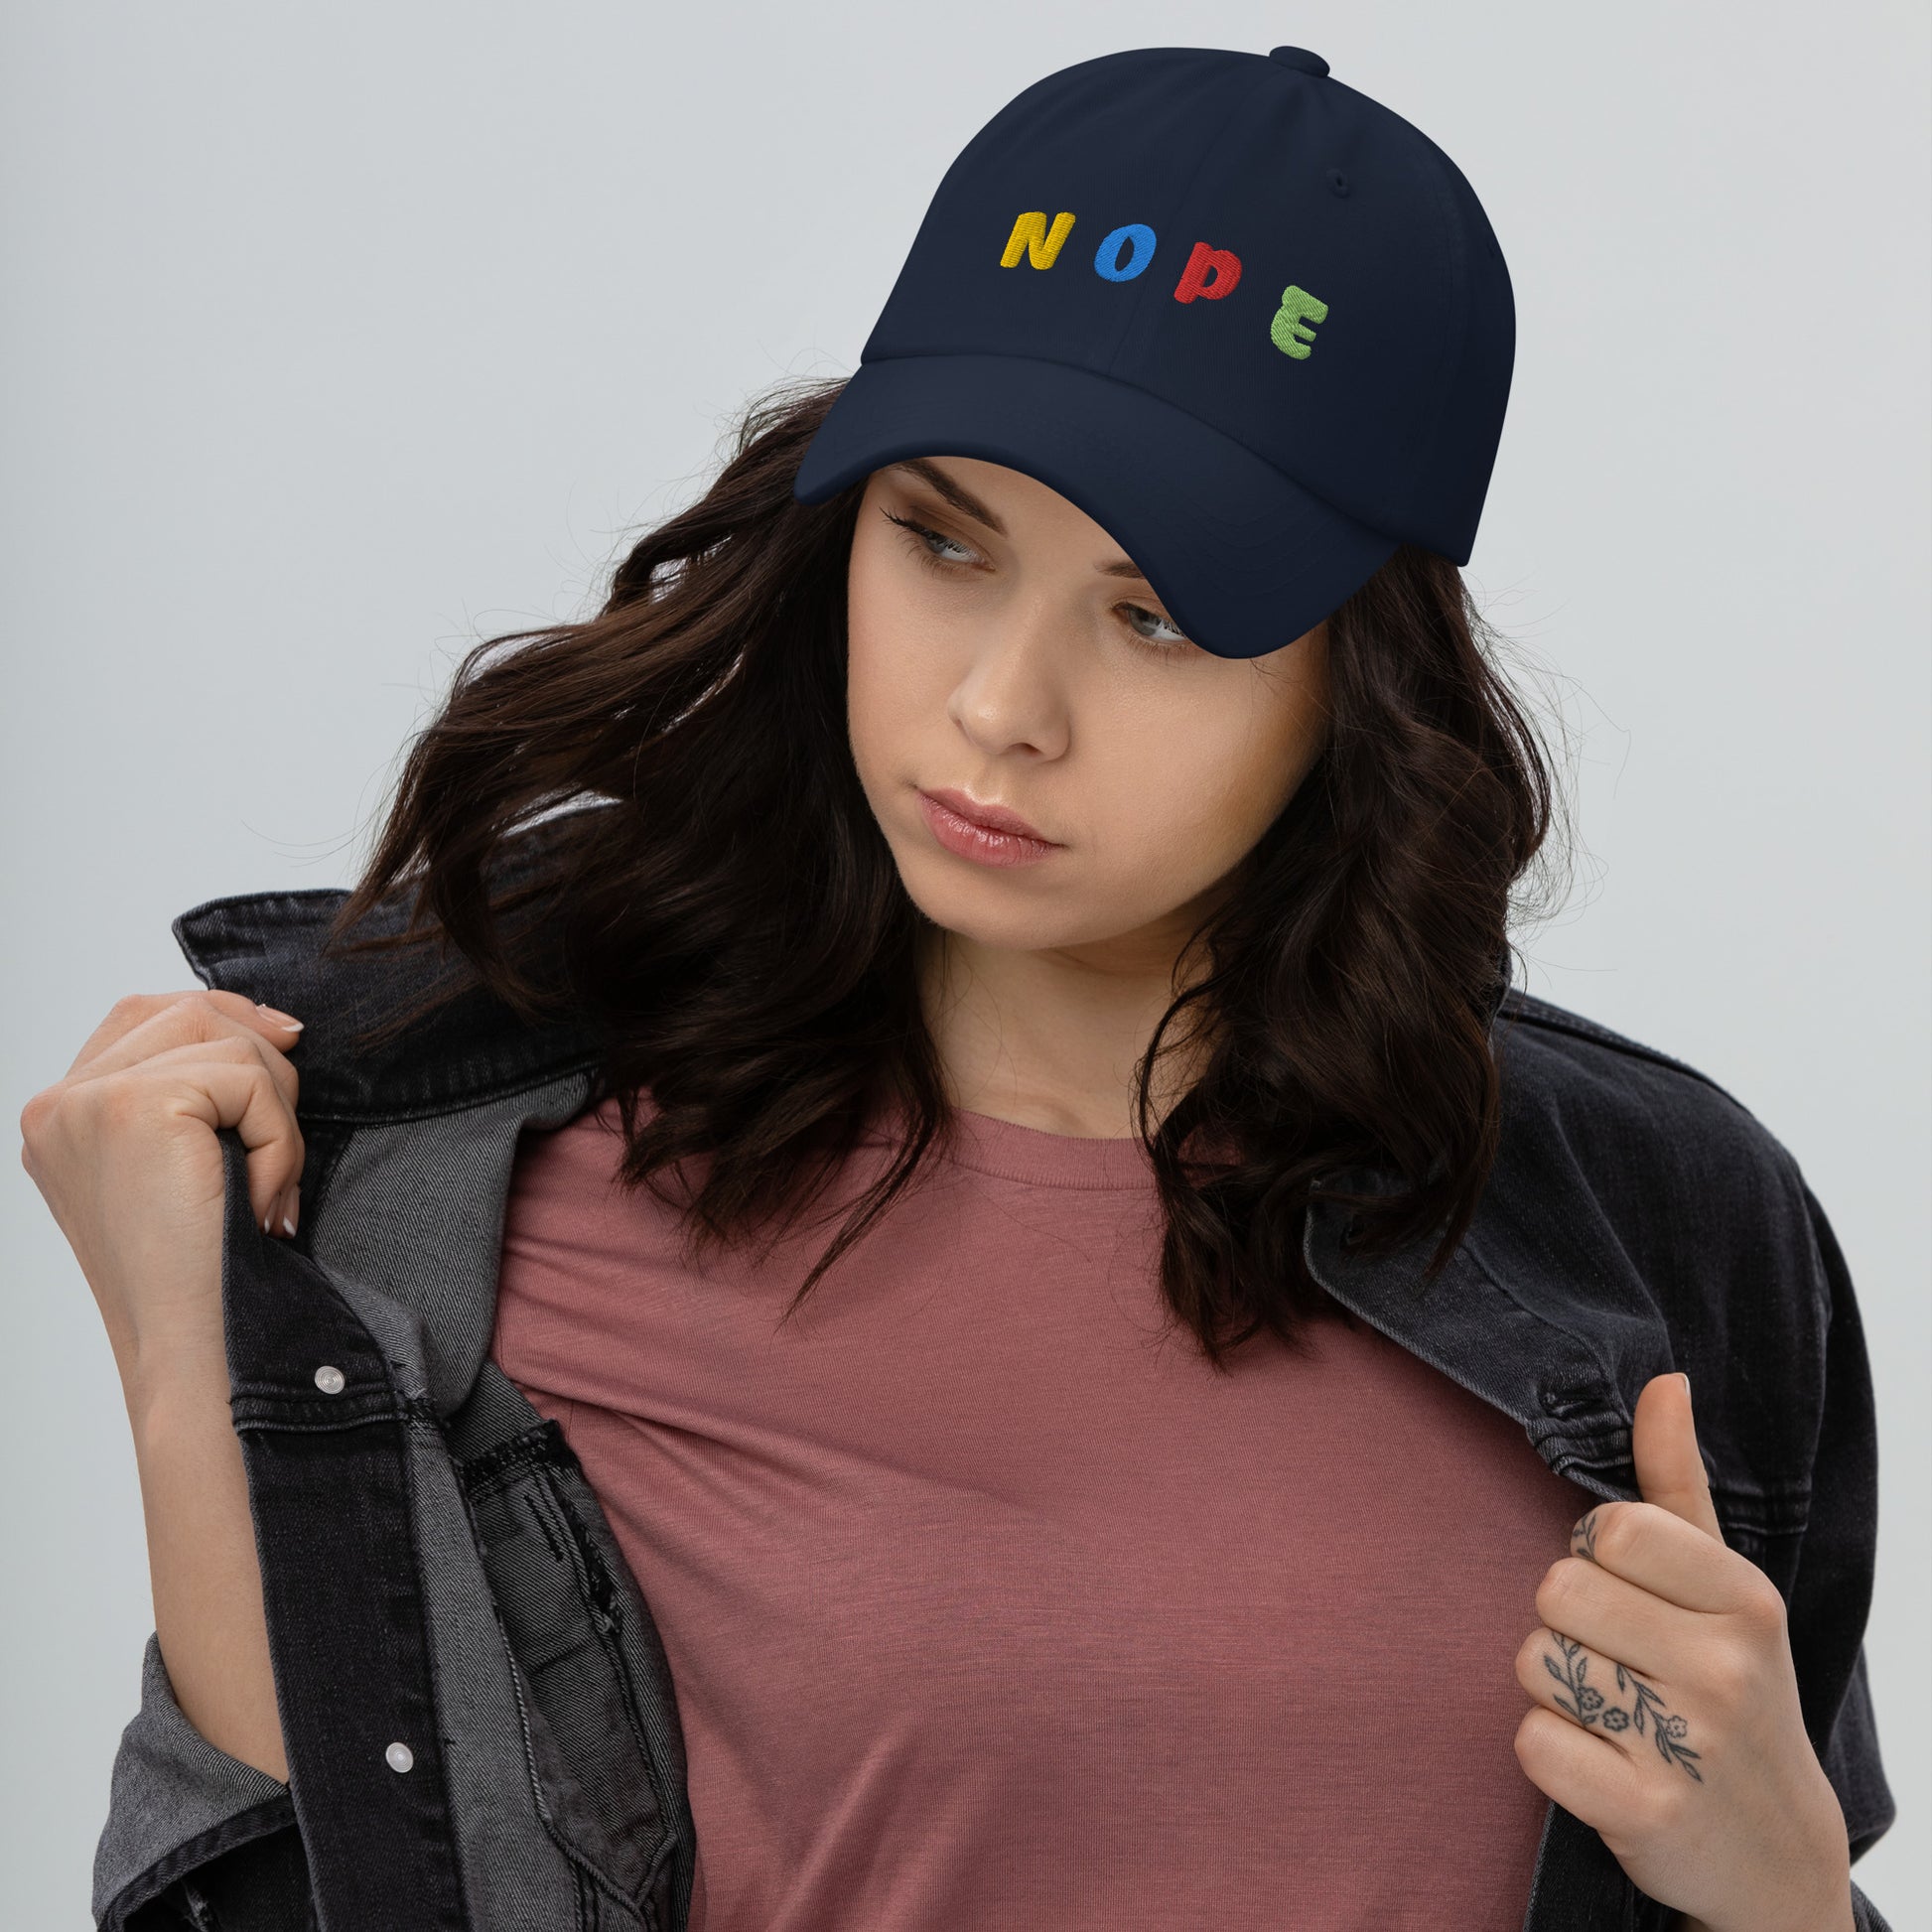 lady wearing navy color hat with "NOPE" written on front